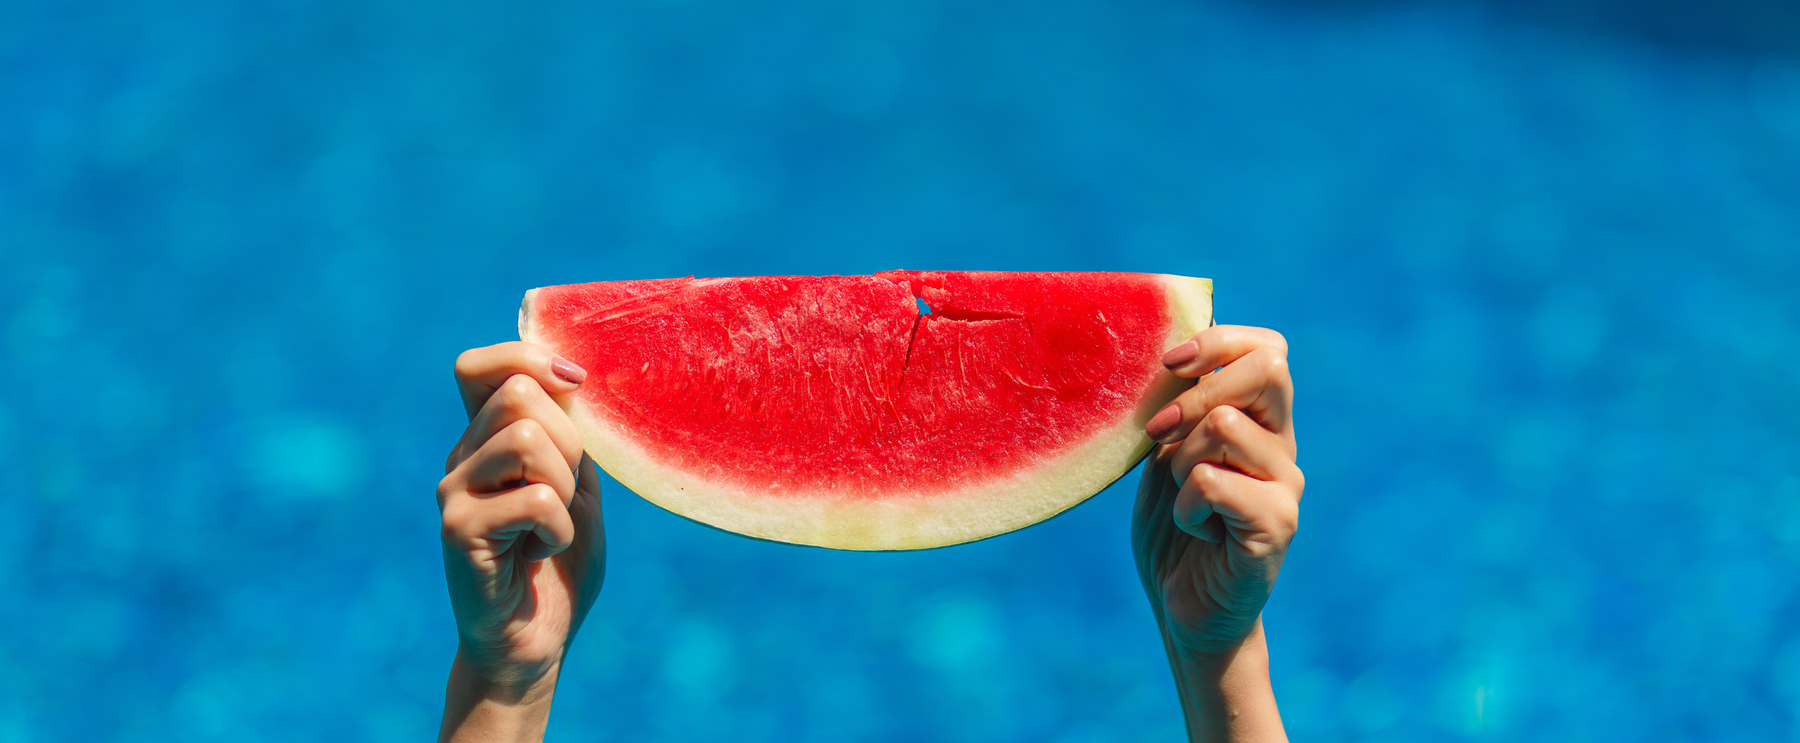 Stay Cool! Best Hydrating Foods For Those Hot Summer Days